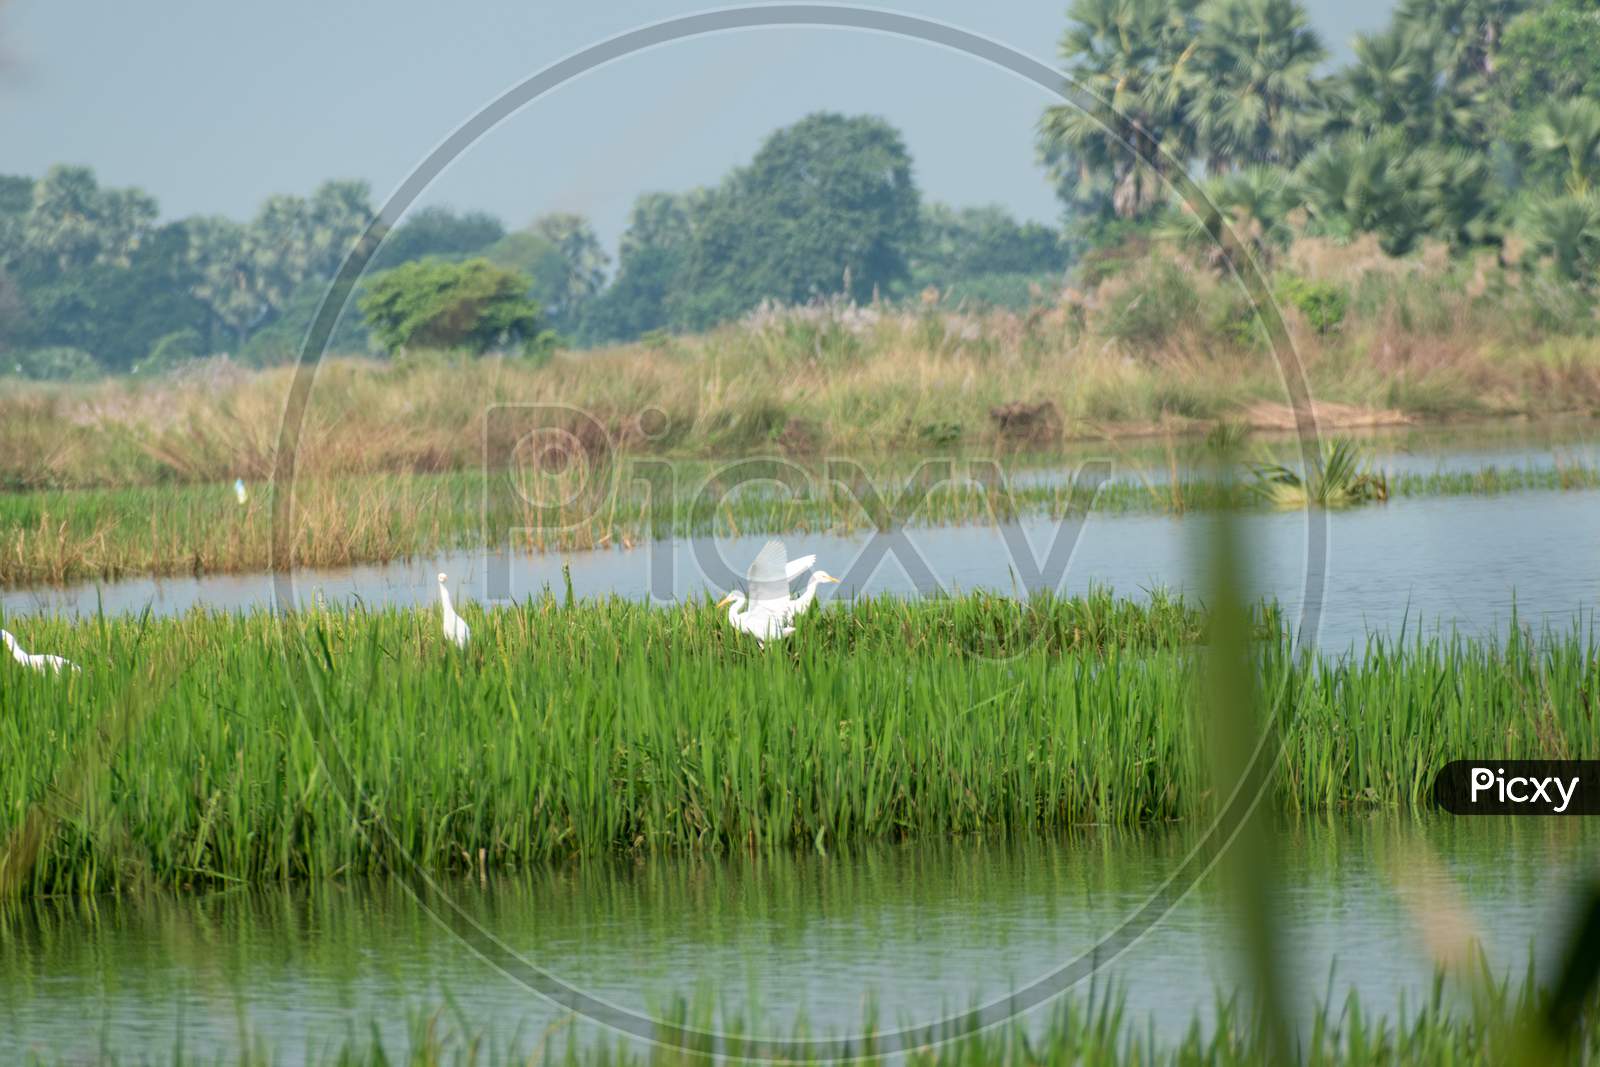 Beautiful views of nature on the banks of a river in West Bengal